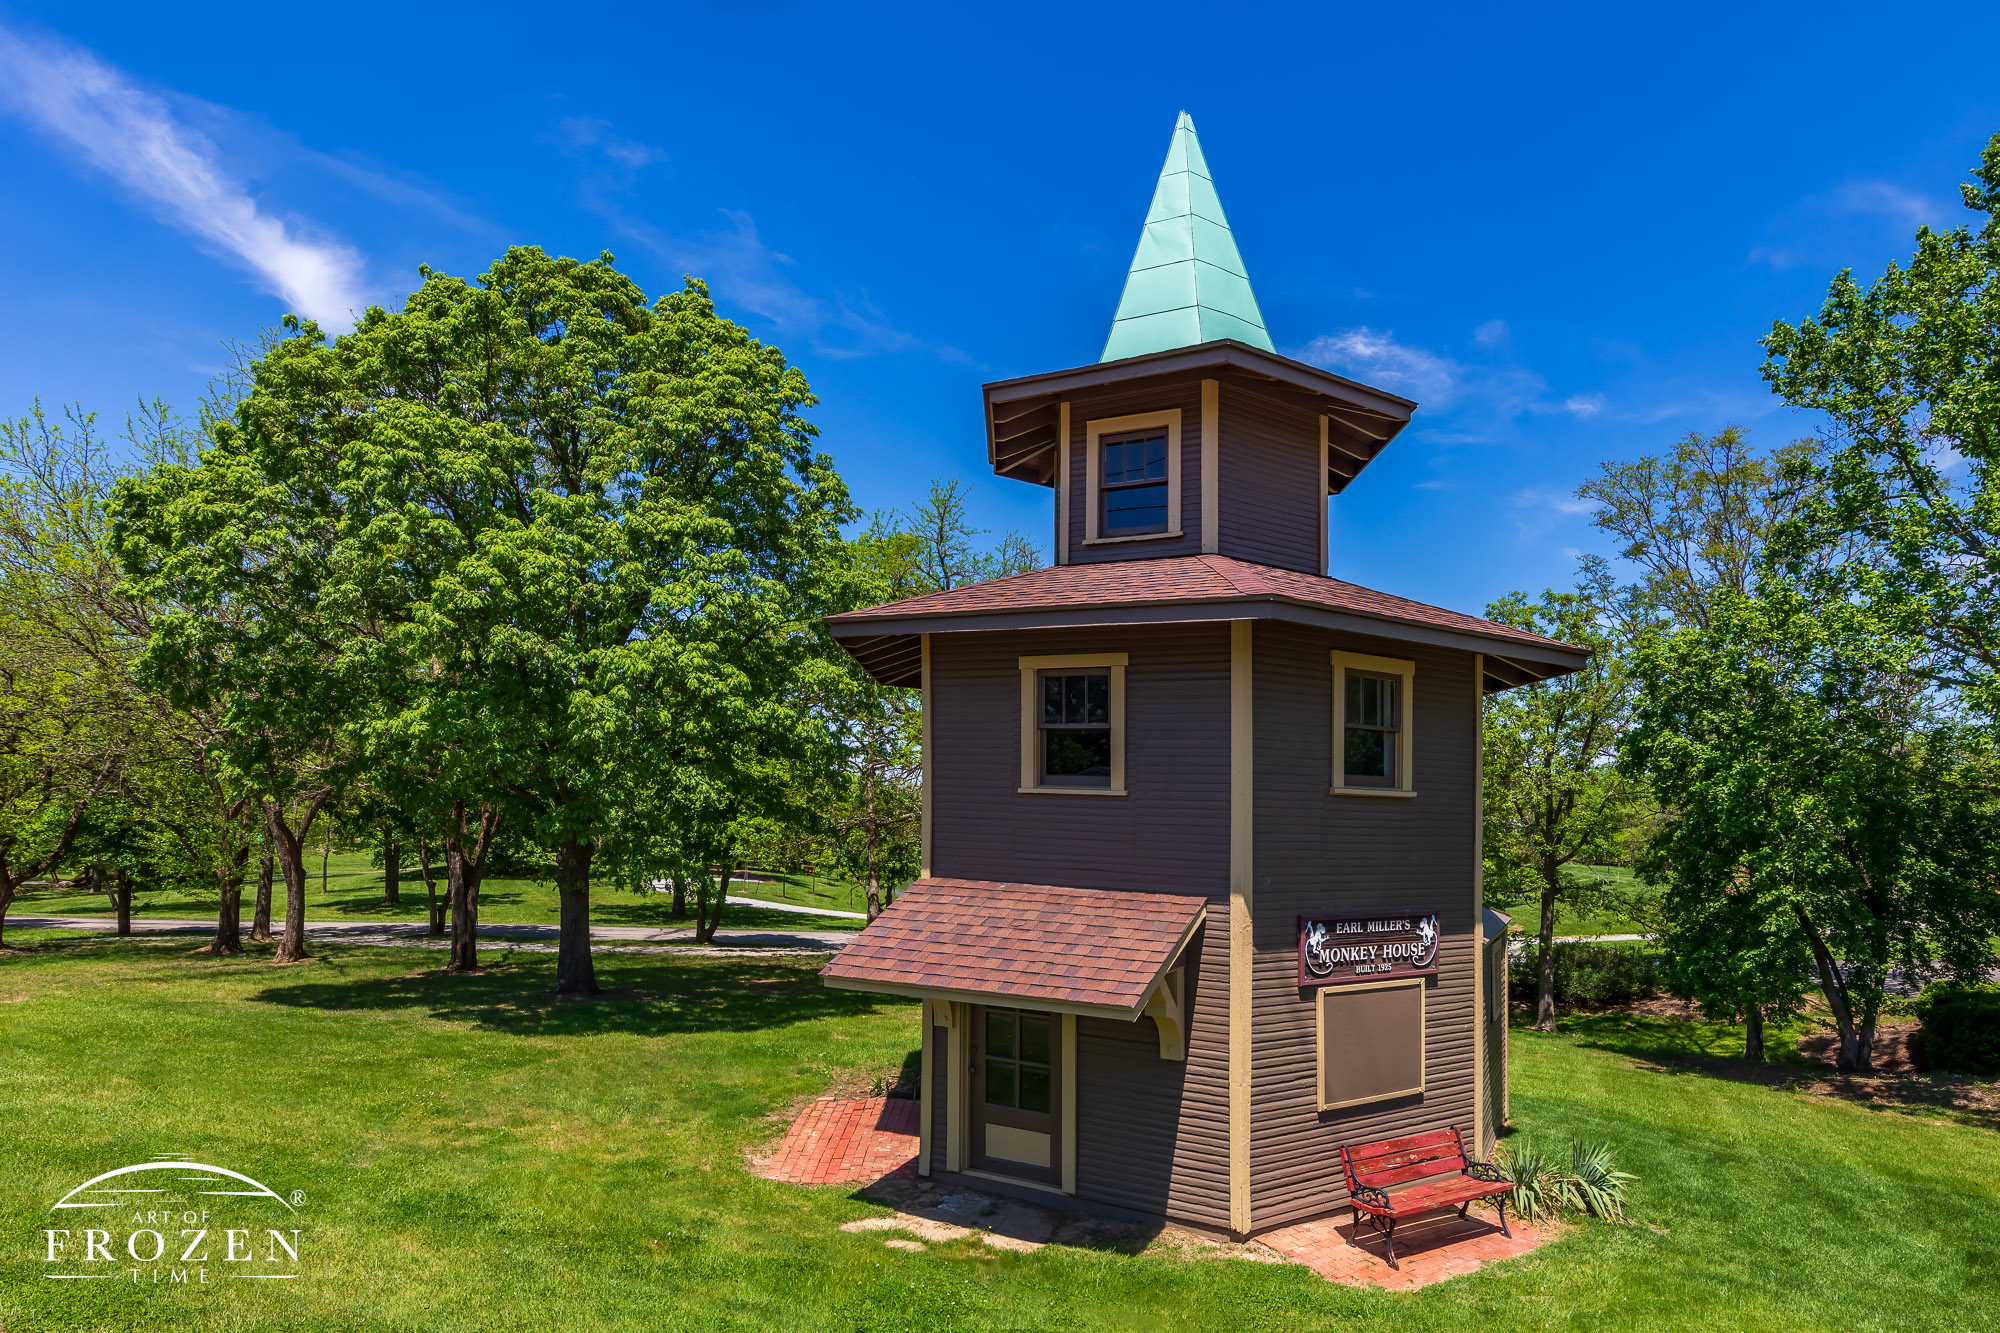 Centerville Ohio fine art print featuring the Monkey House at Stubbs Park on a pretty spring day.